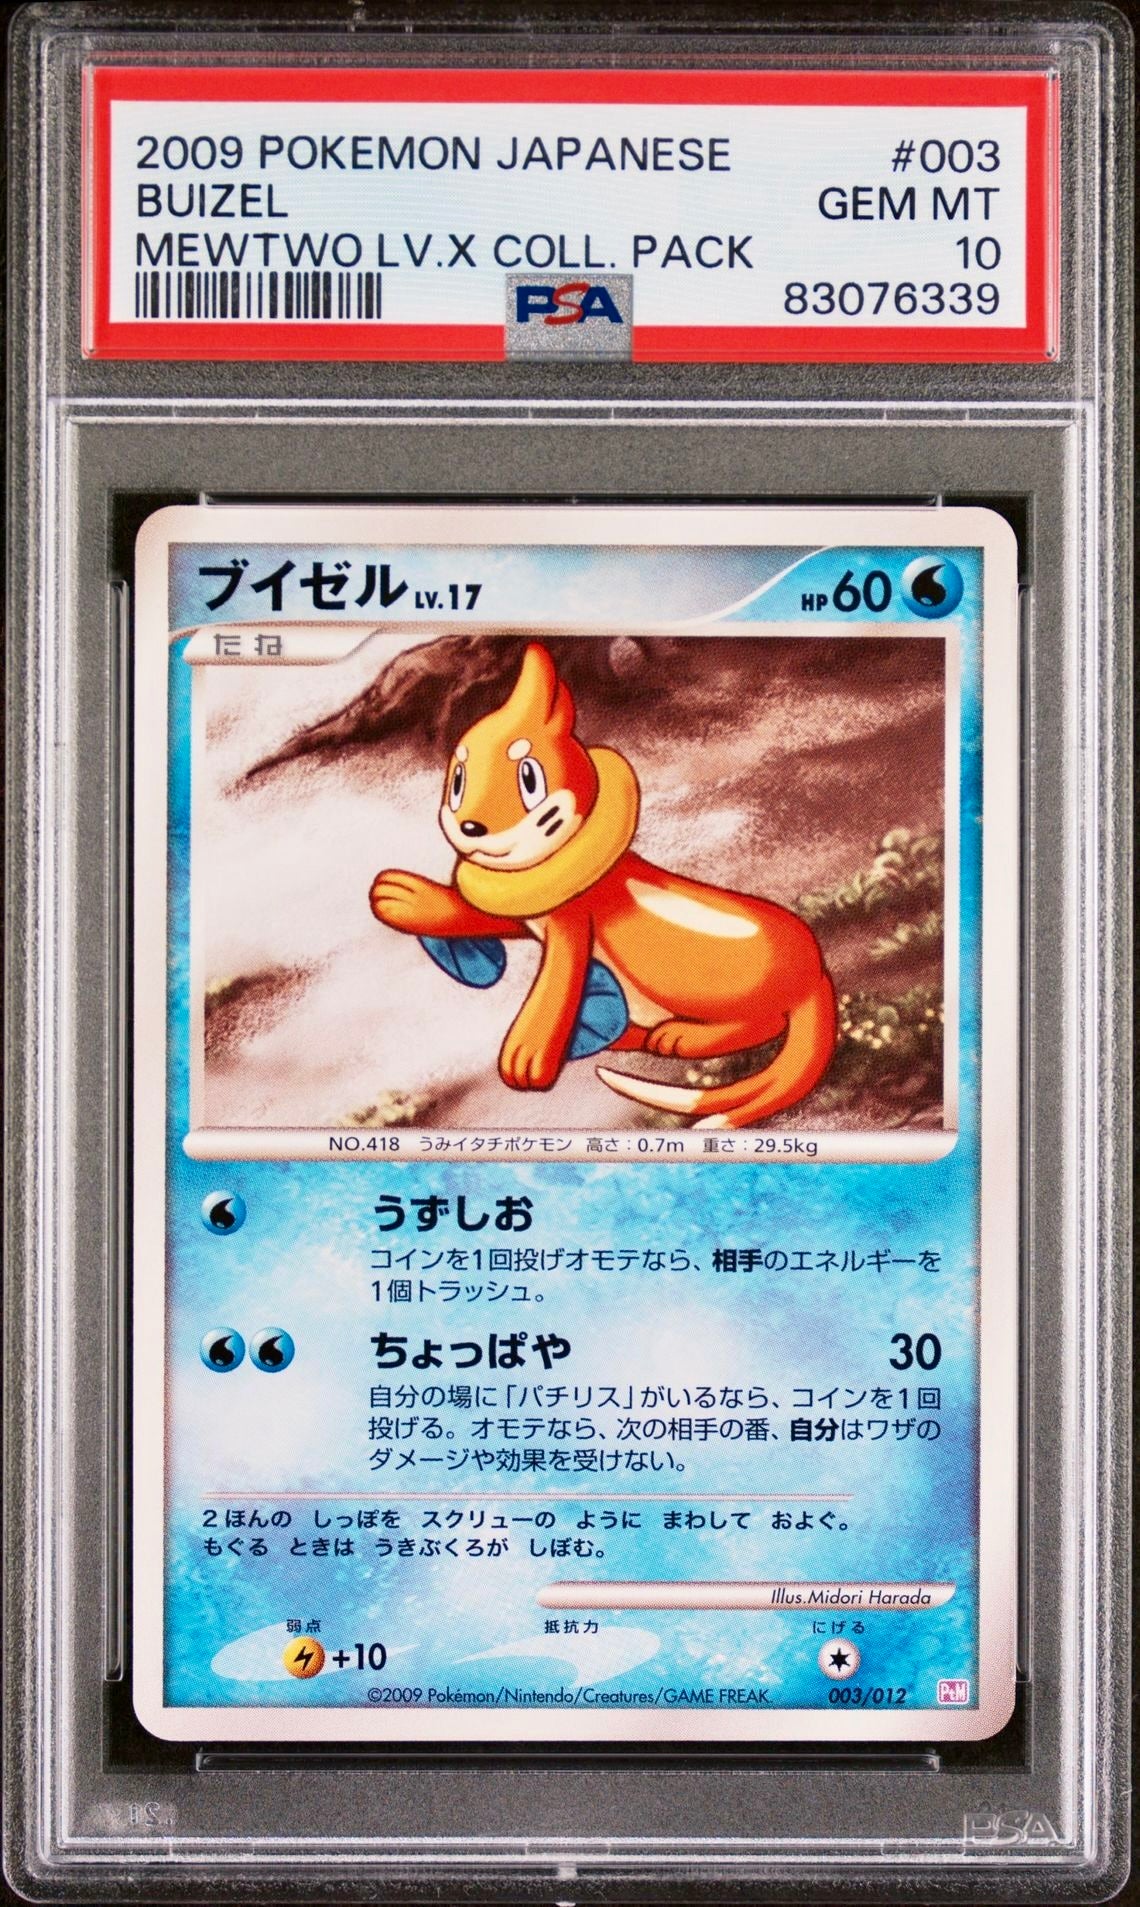 PSA 10 - Buizel 003/012 PtM Mewtwo Lv.X Collection Pack - Pokemon